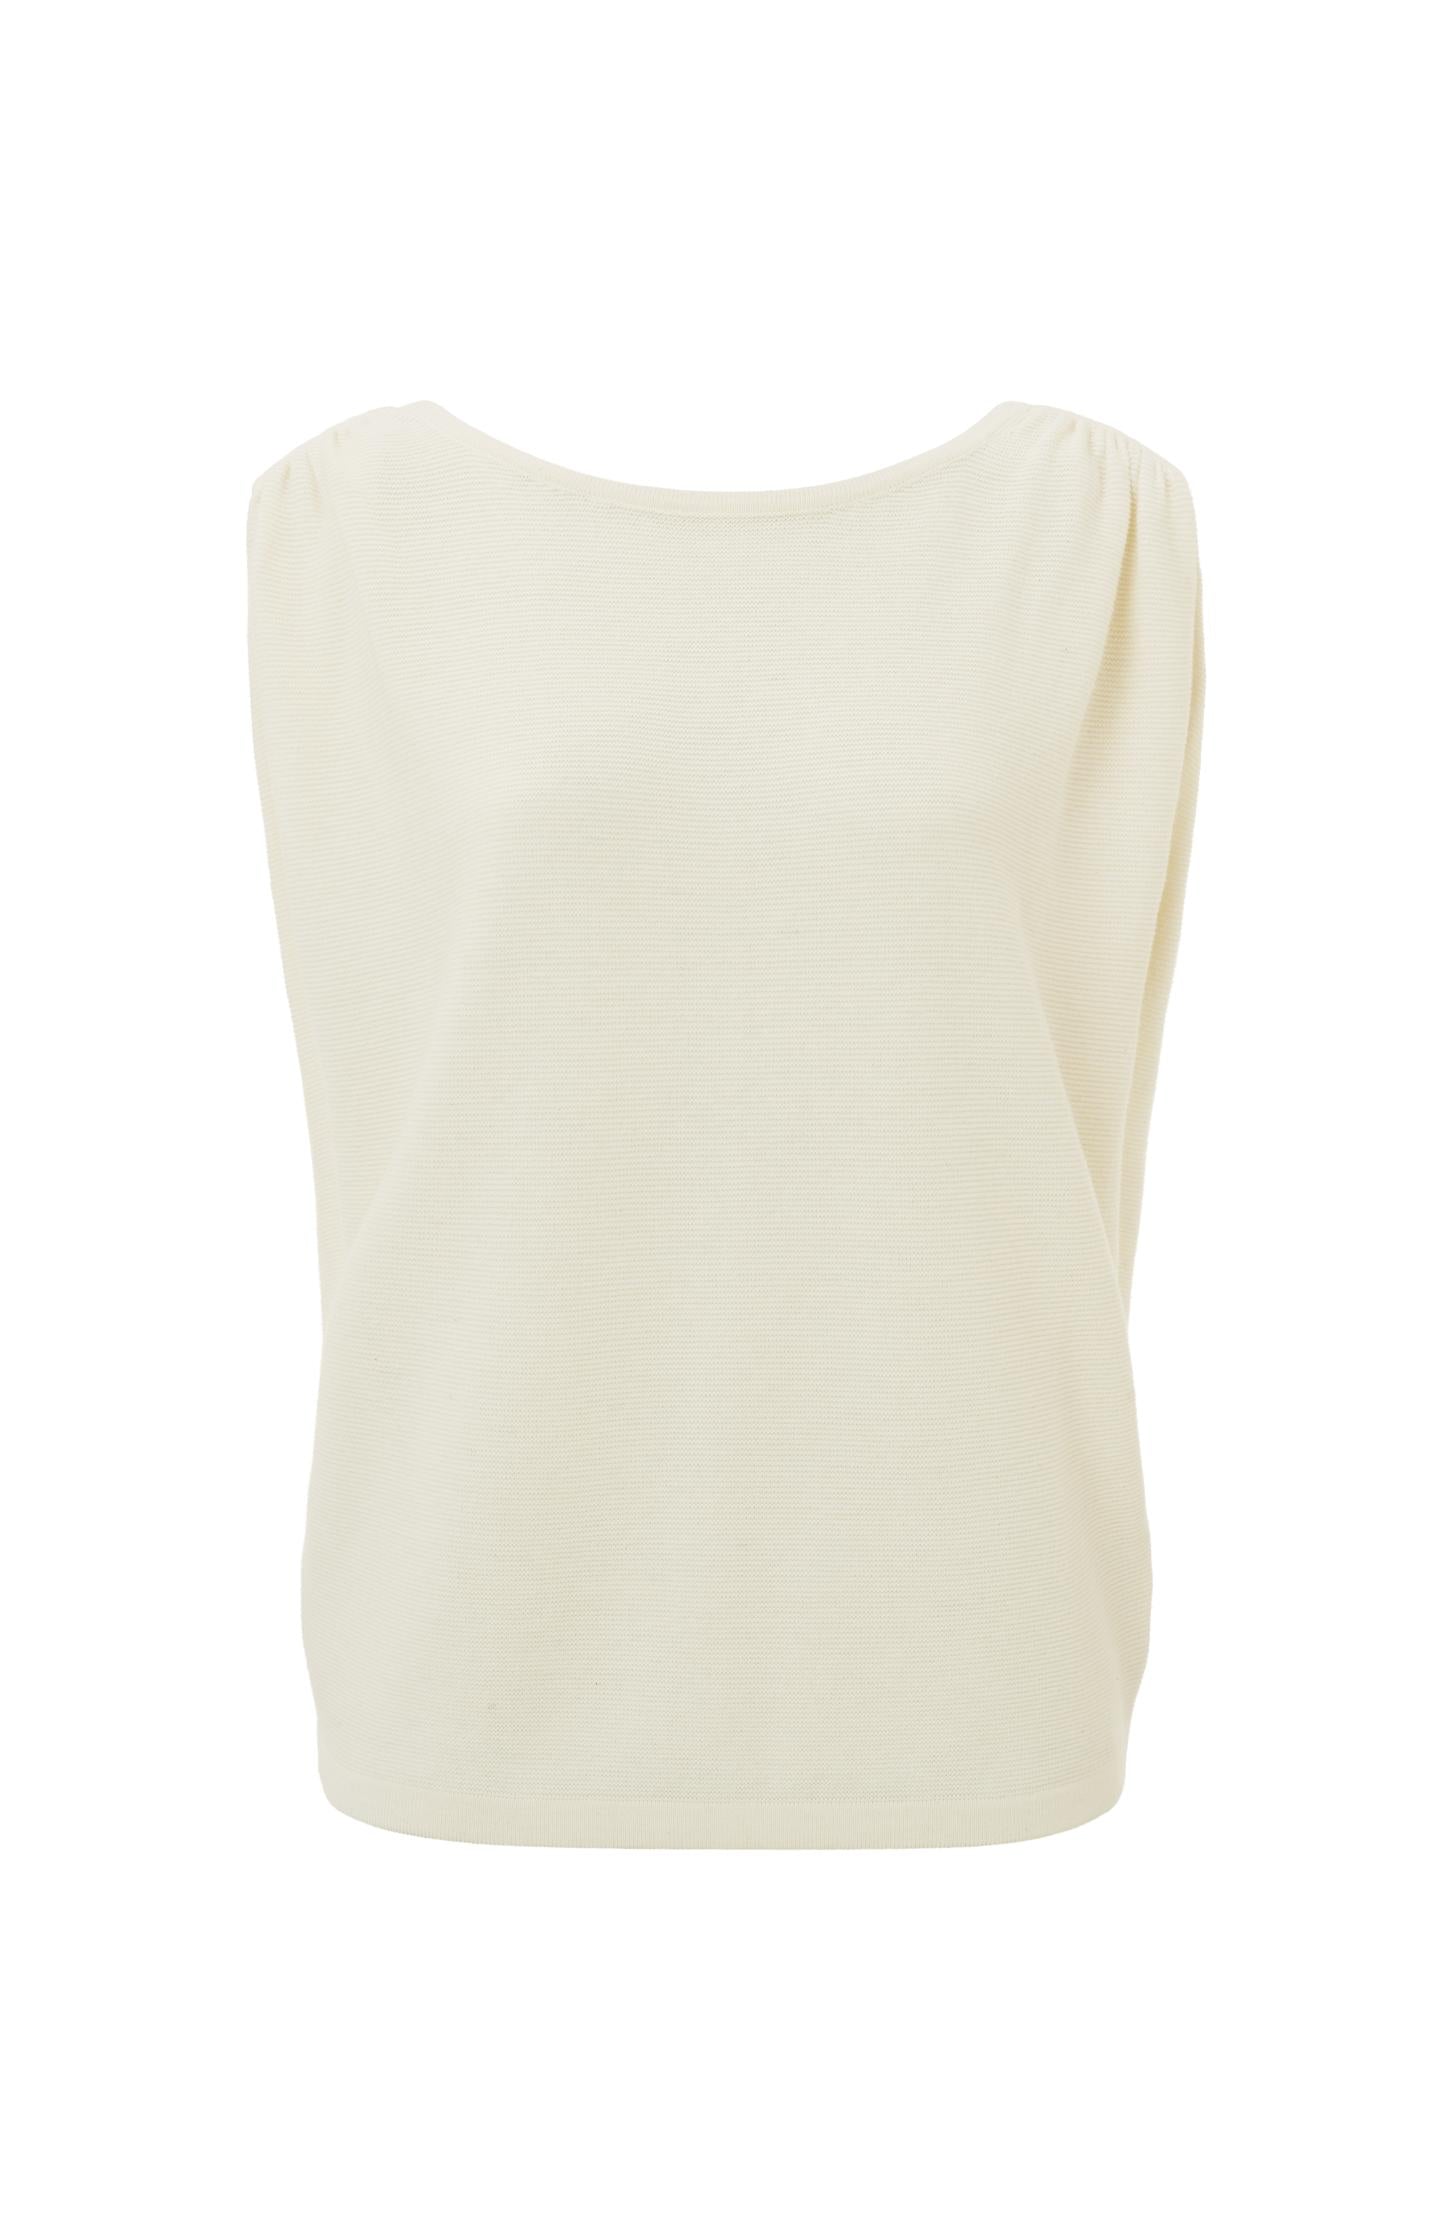 Sleeveless sweater with boat neck and button on back - Type: product